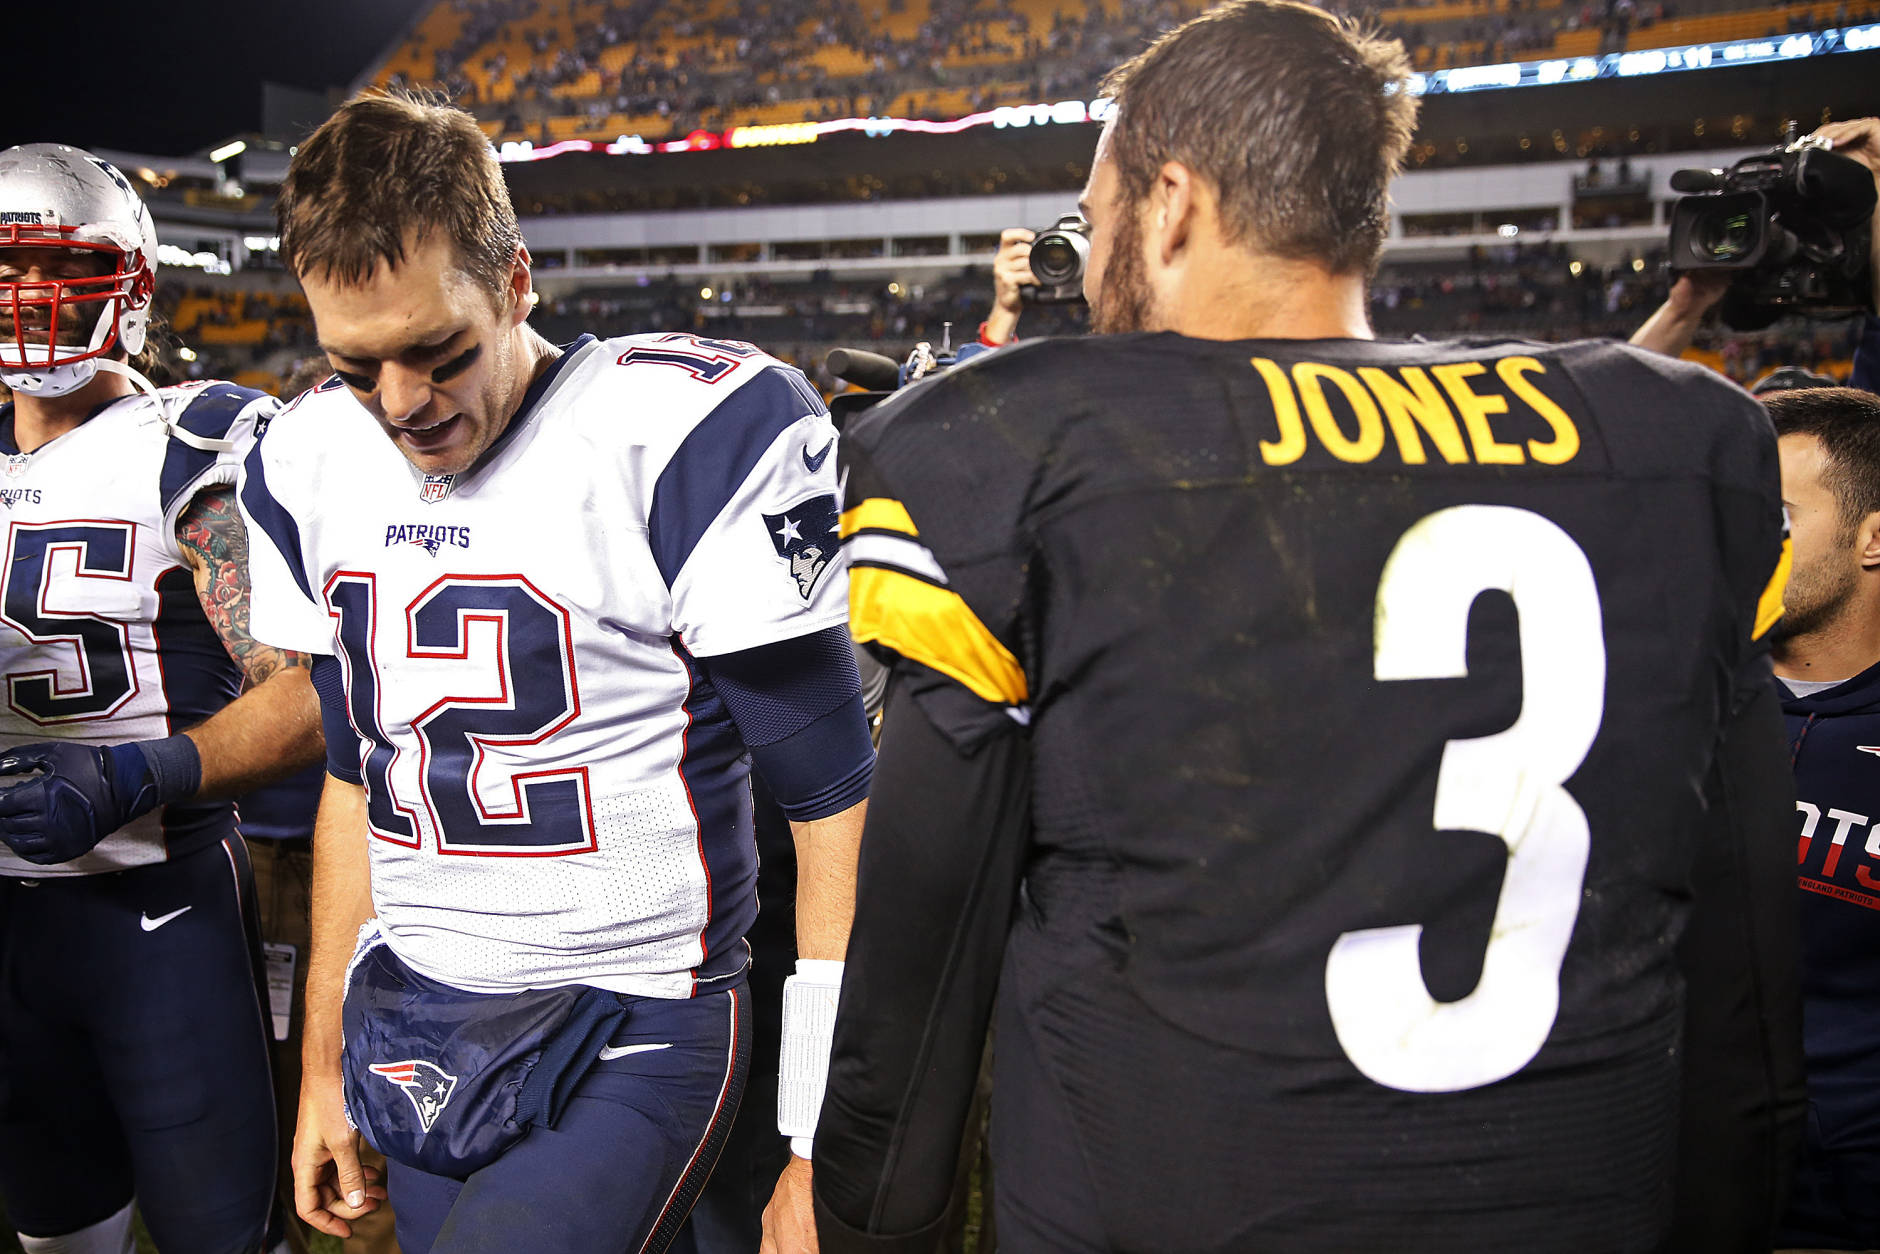 New England Patriots quarterback Tom Brady (12) talks with Pittsburgh Steelers quarterback Landry Jones (3) on the field after an NFL football game in Pittsburgh, Sunday, Oct. 23, 2016. The Patriots won 27-16. (AP Photo/Jared Wickerham)